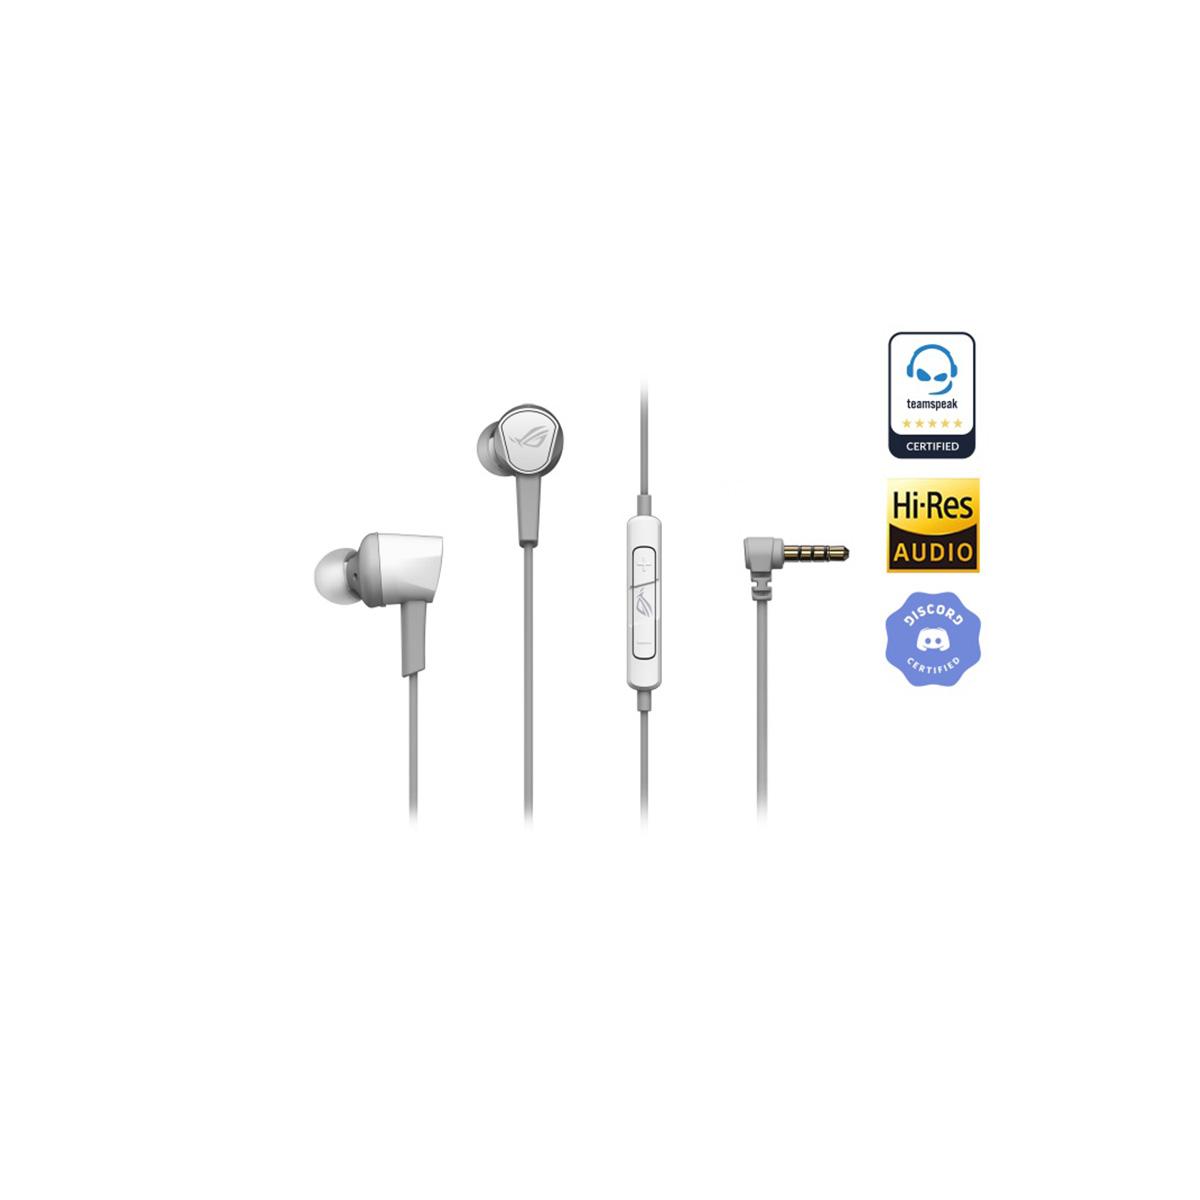 ROG CETRA II CORE ML AUDIFONOS ASUS (ROG CETRA II CORE ML) IN-EAR,3.5MM,GAMING,PC,MAC,SWITCH,PS4,PS5,XBOX SS,BLANCO